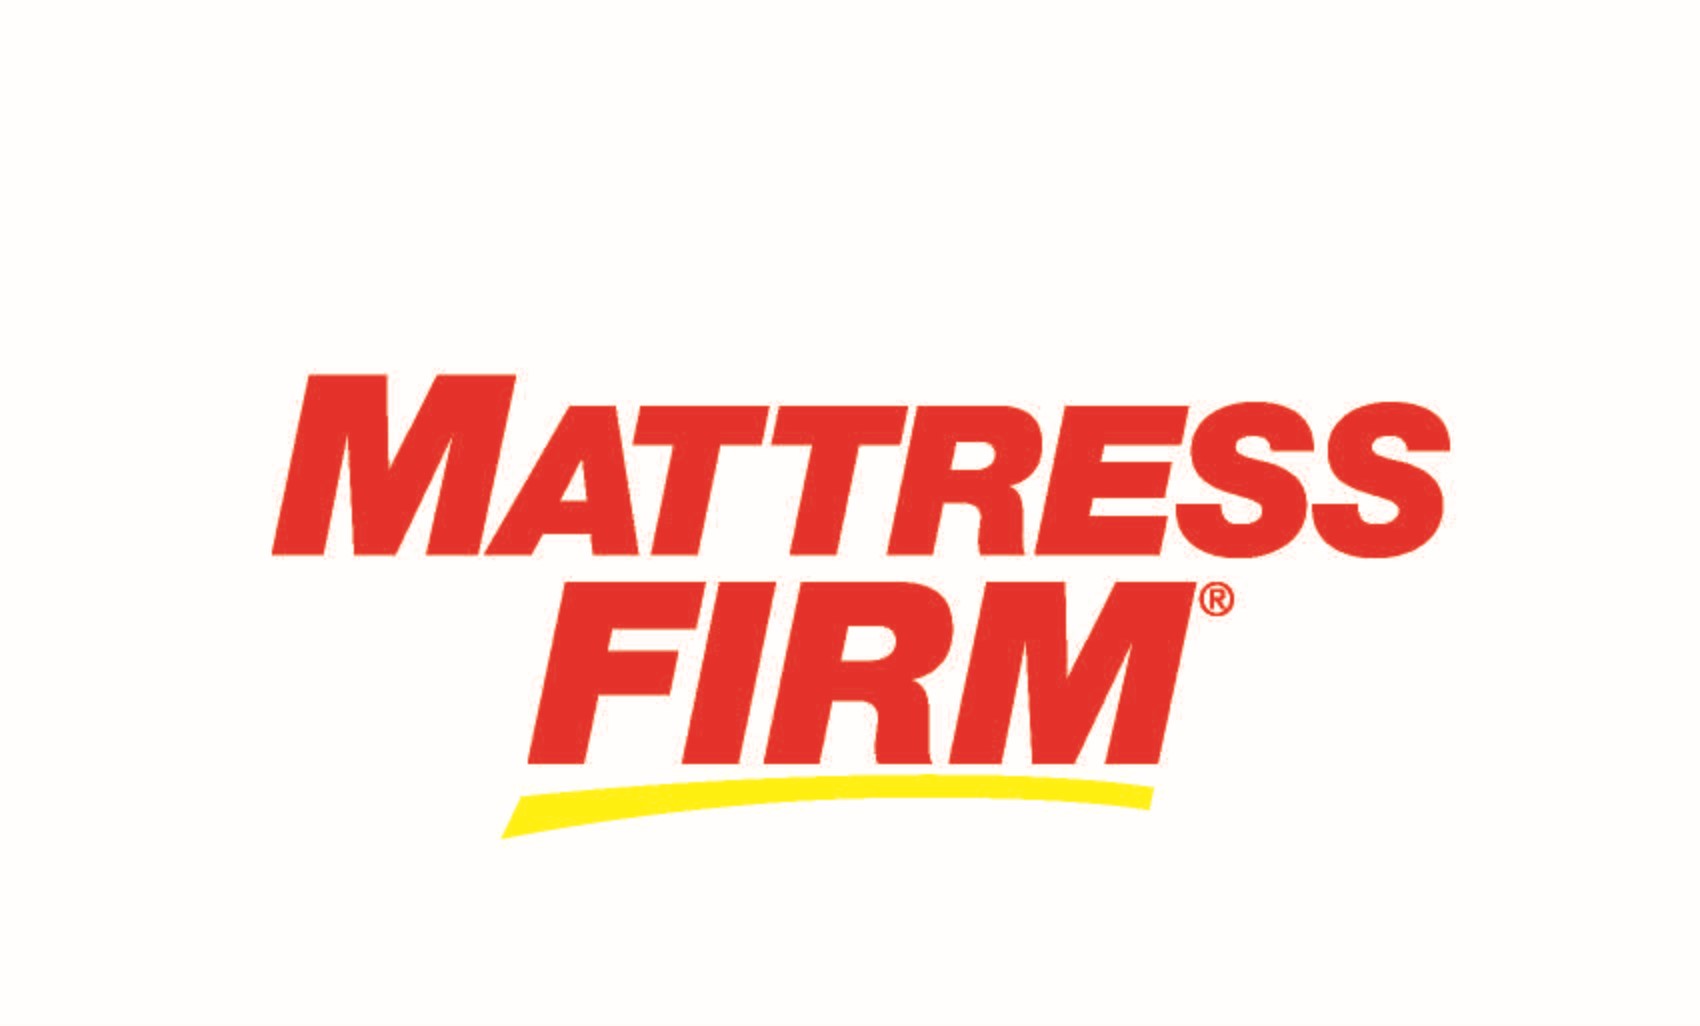 Mattress Firm Early Giving Prizes